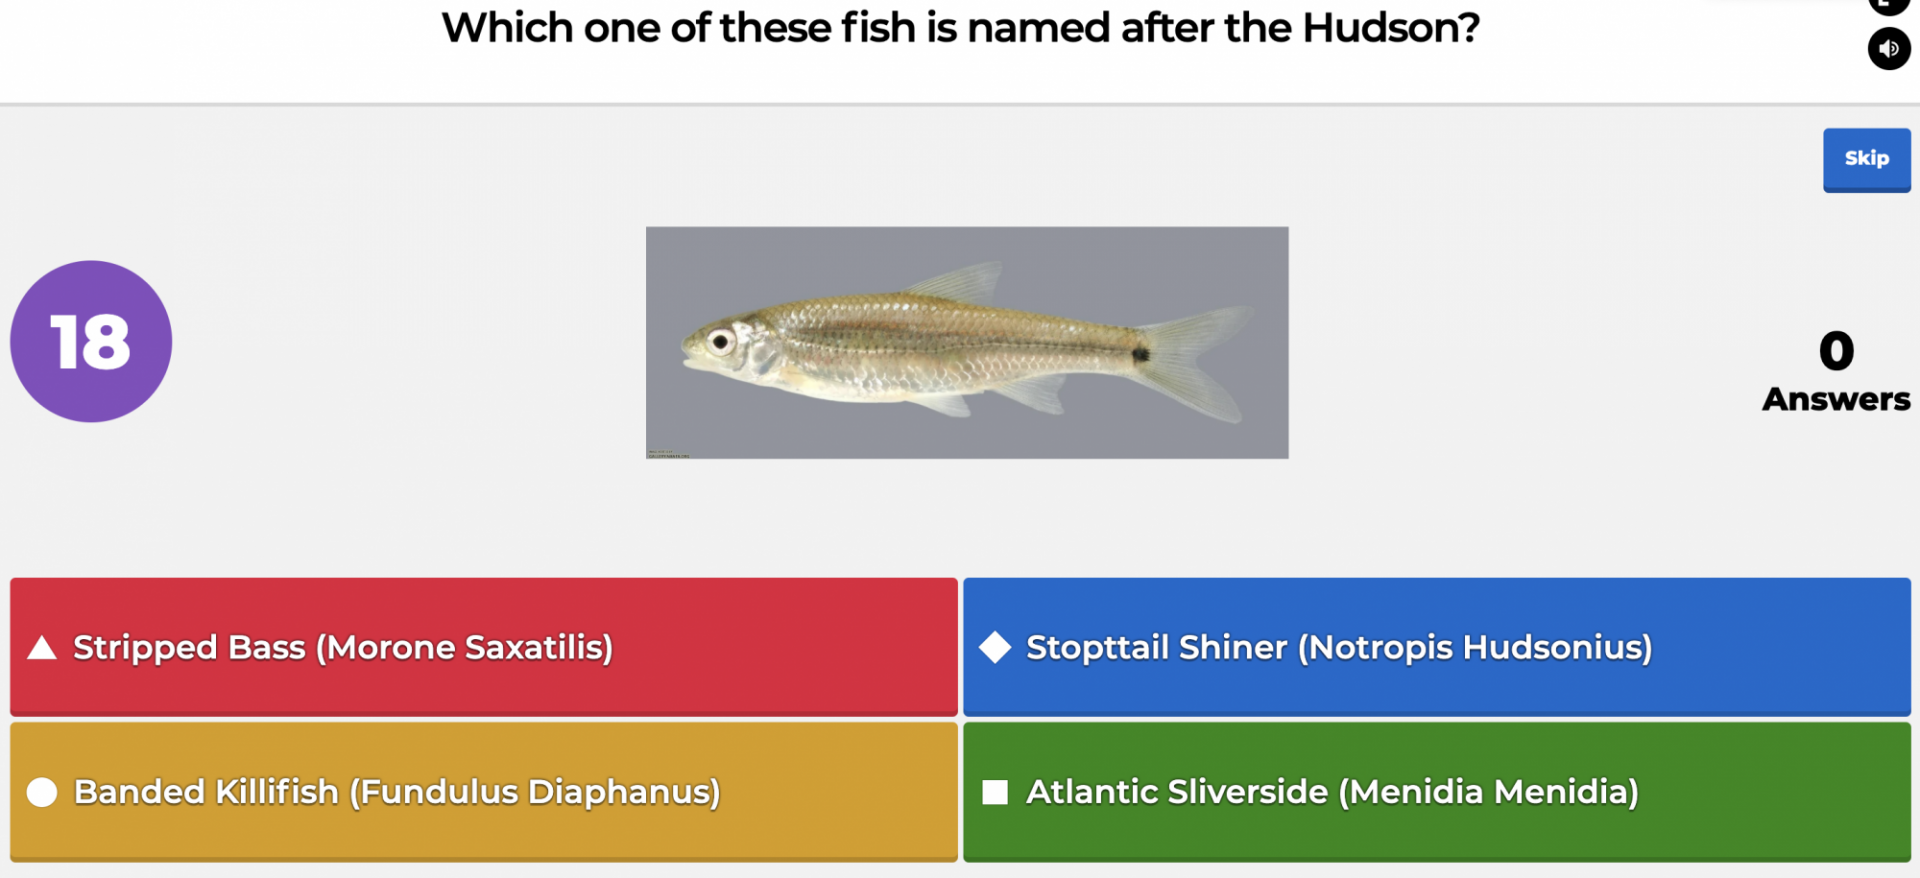 How well do you know the Hudson River and the fish that reside in it? Play this #kahoot and put your knowledge to the test!